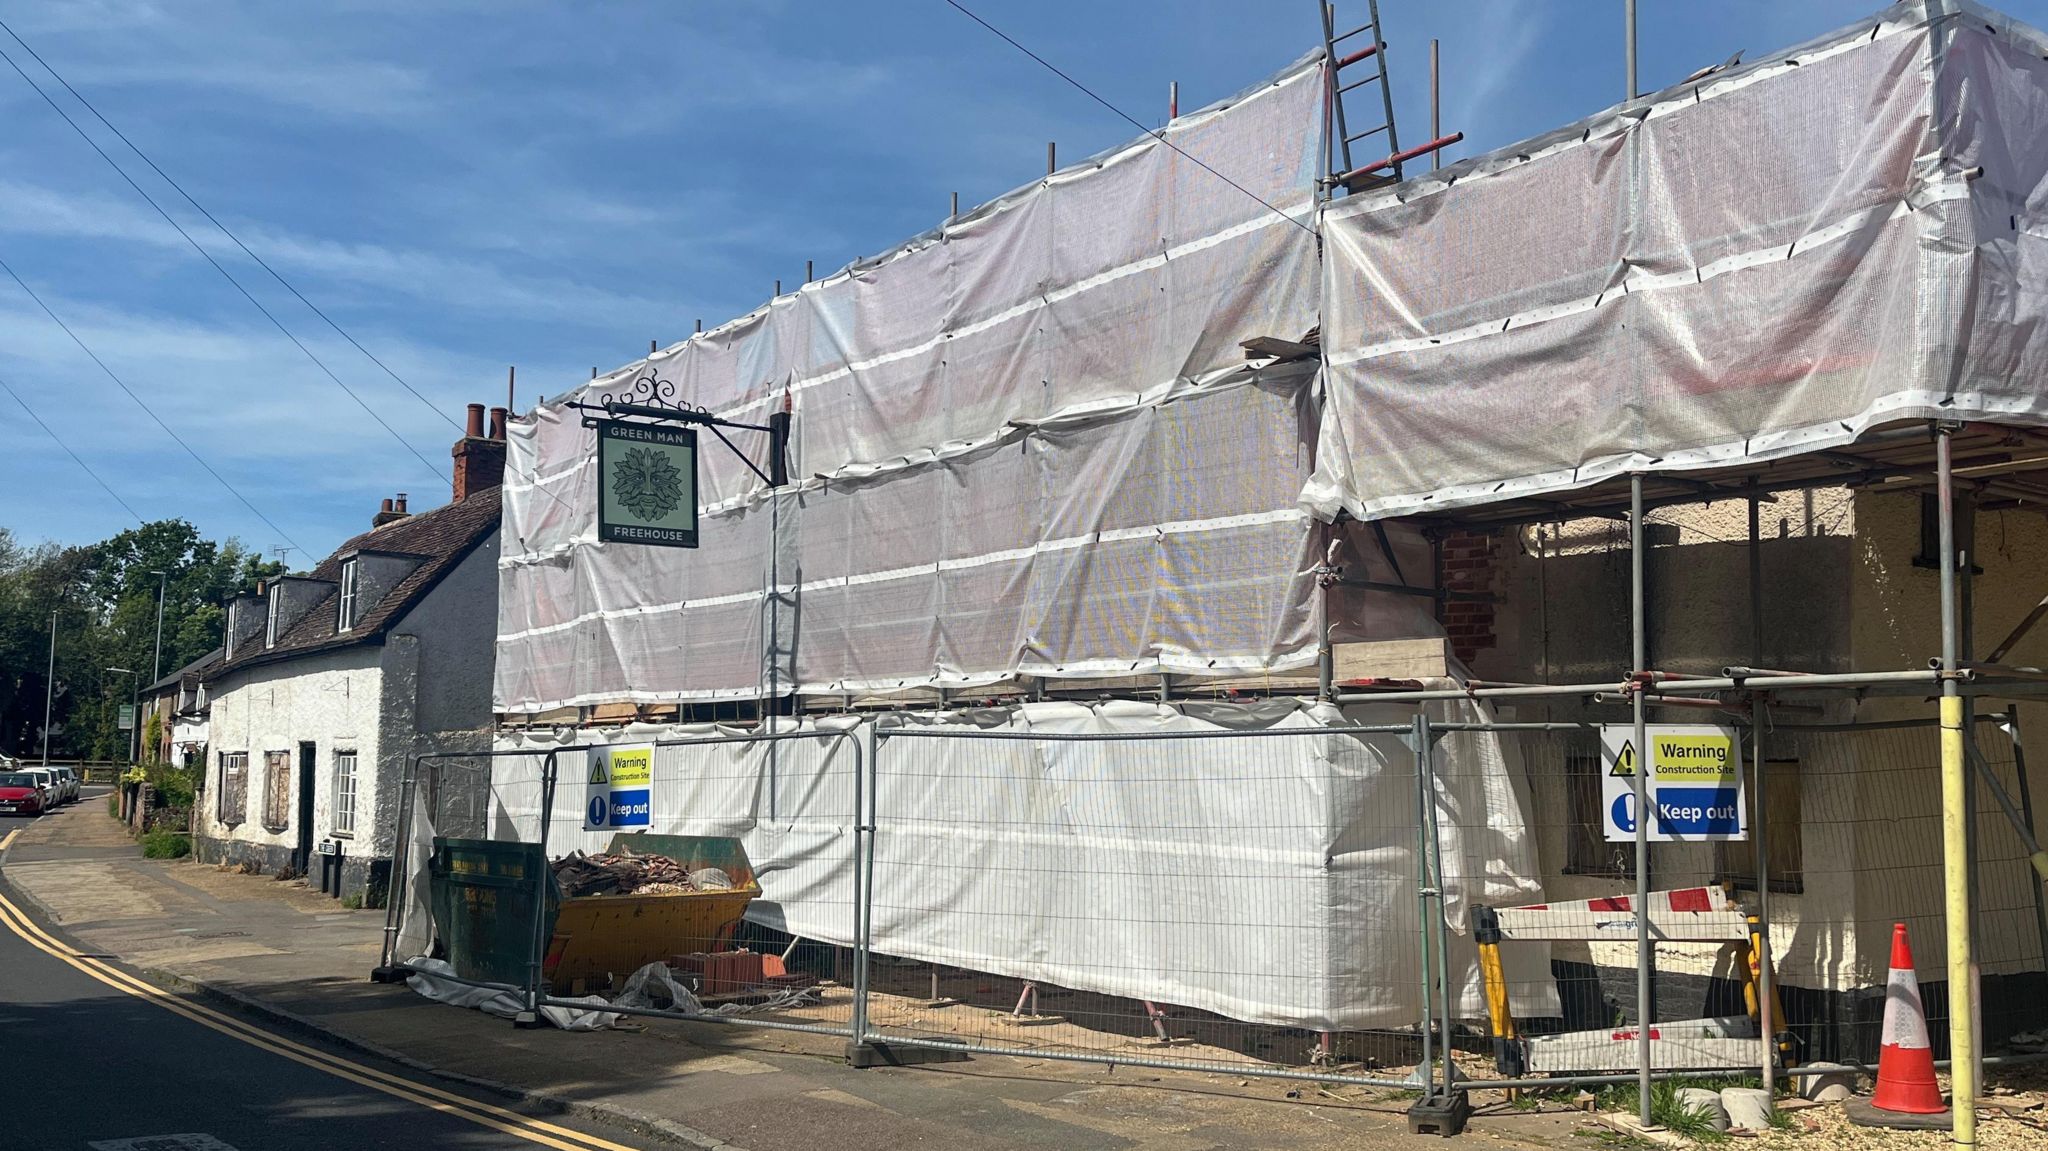 The damaged pub covered in scaffolding